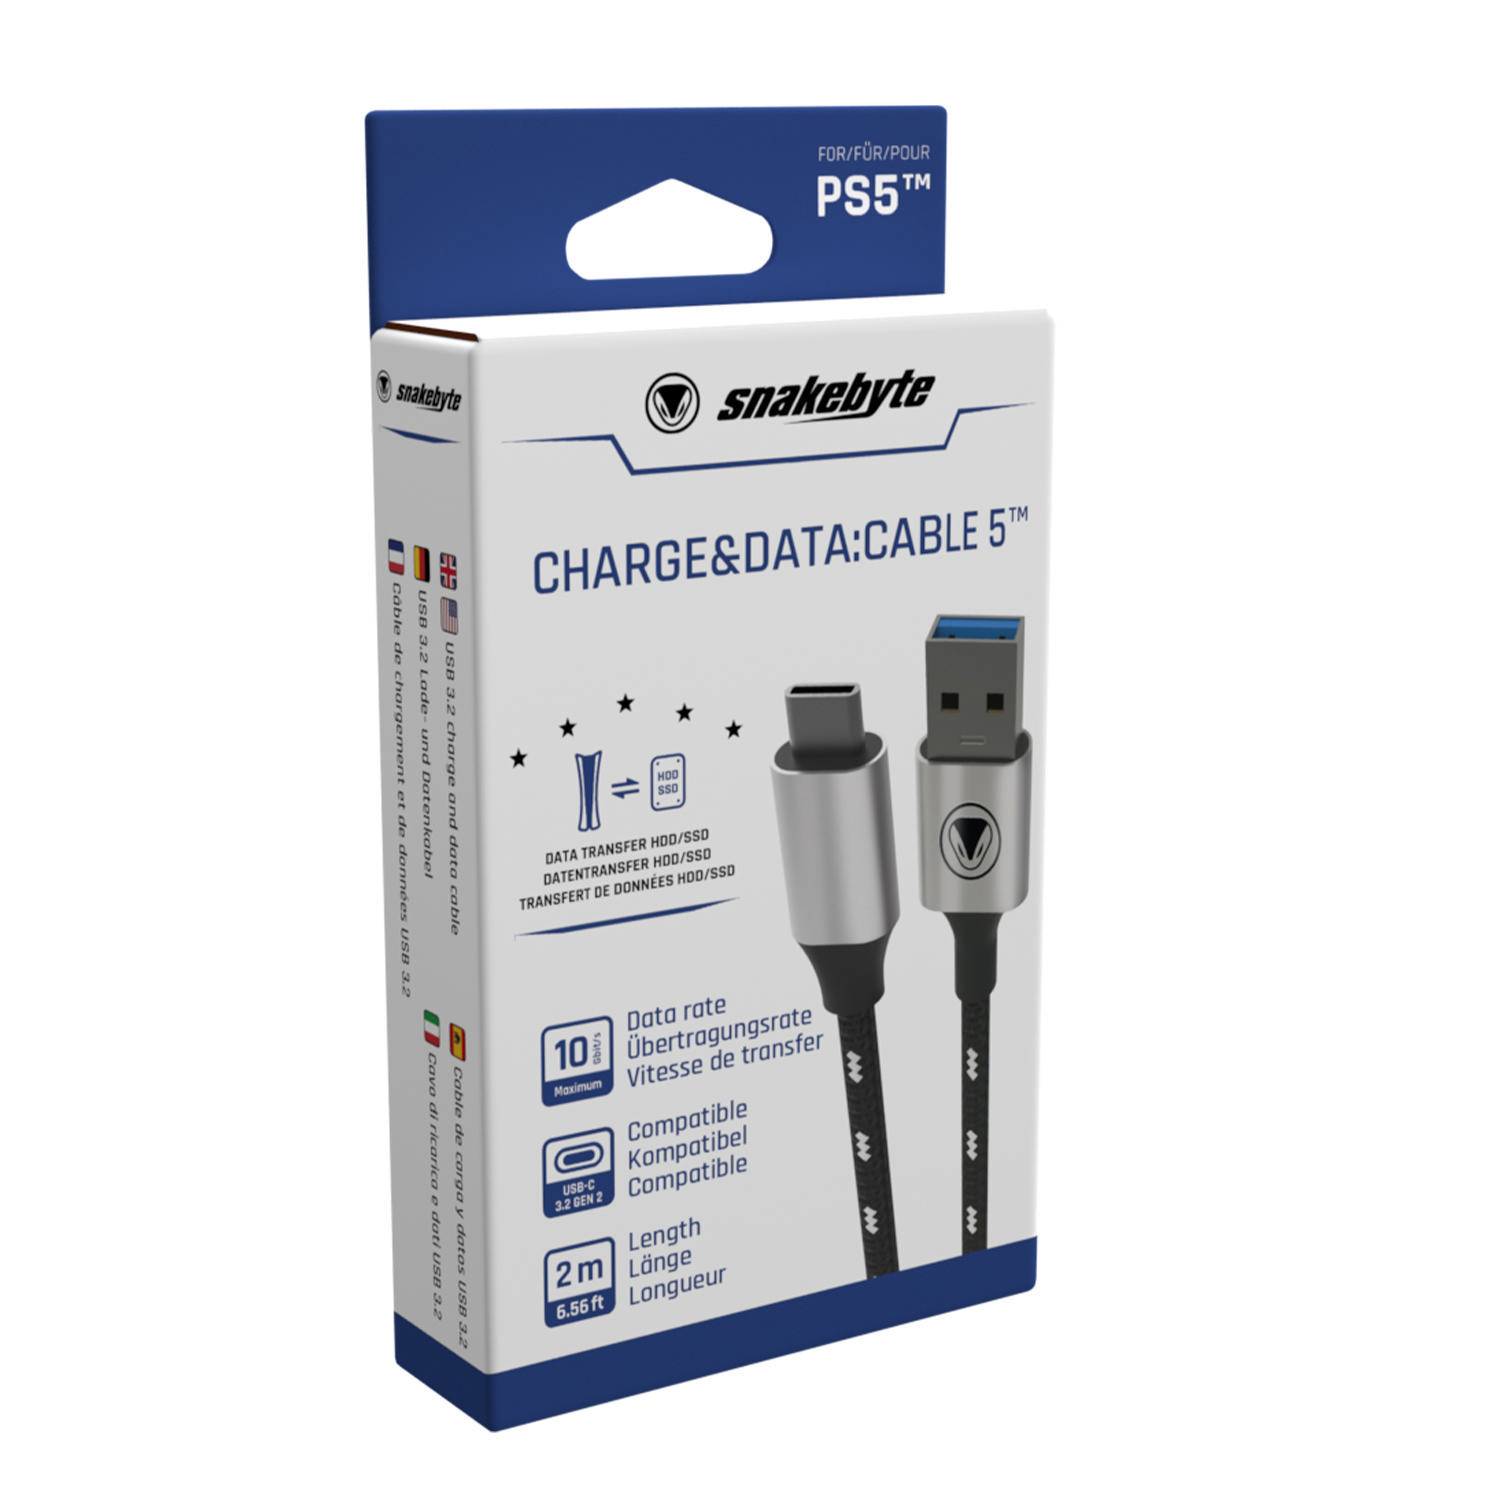 SNAKEBYTE PS5 5 Schwarz/Weiß CABLE Zubehör USB Charge Data: (2m) & PS5